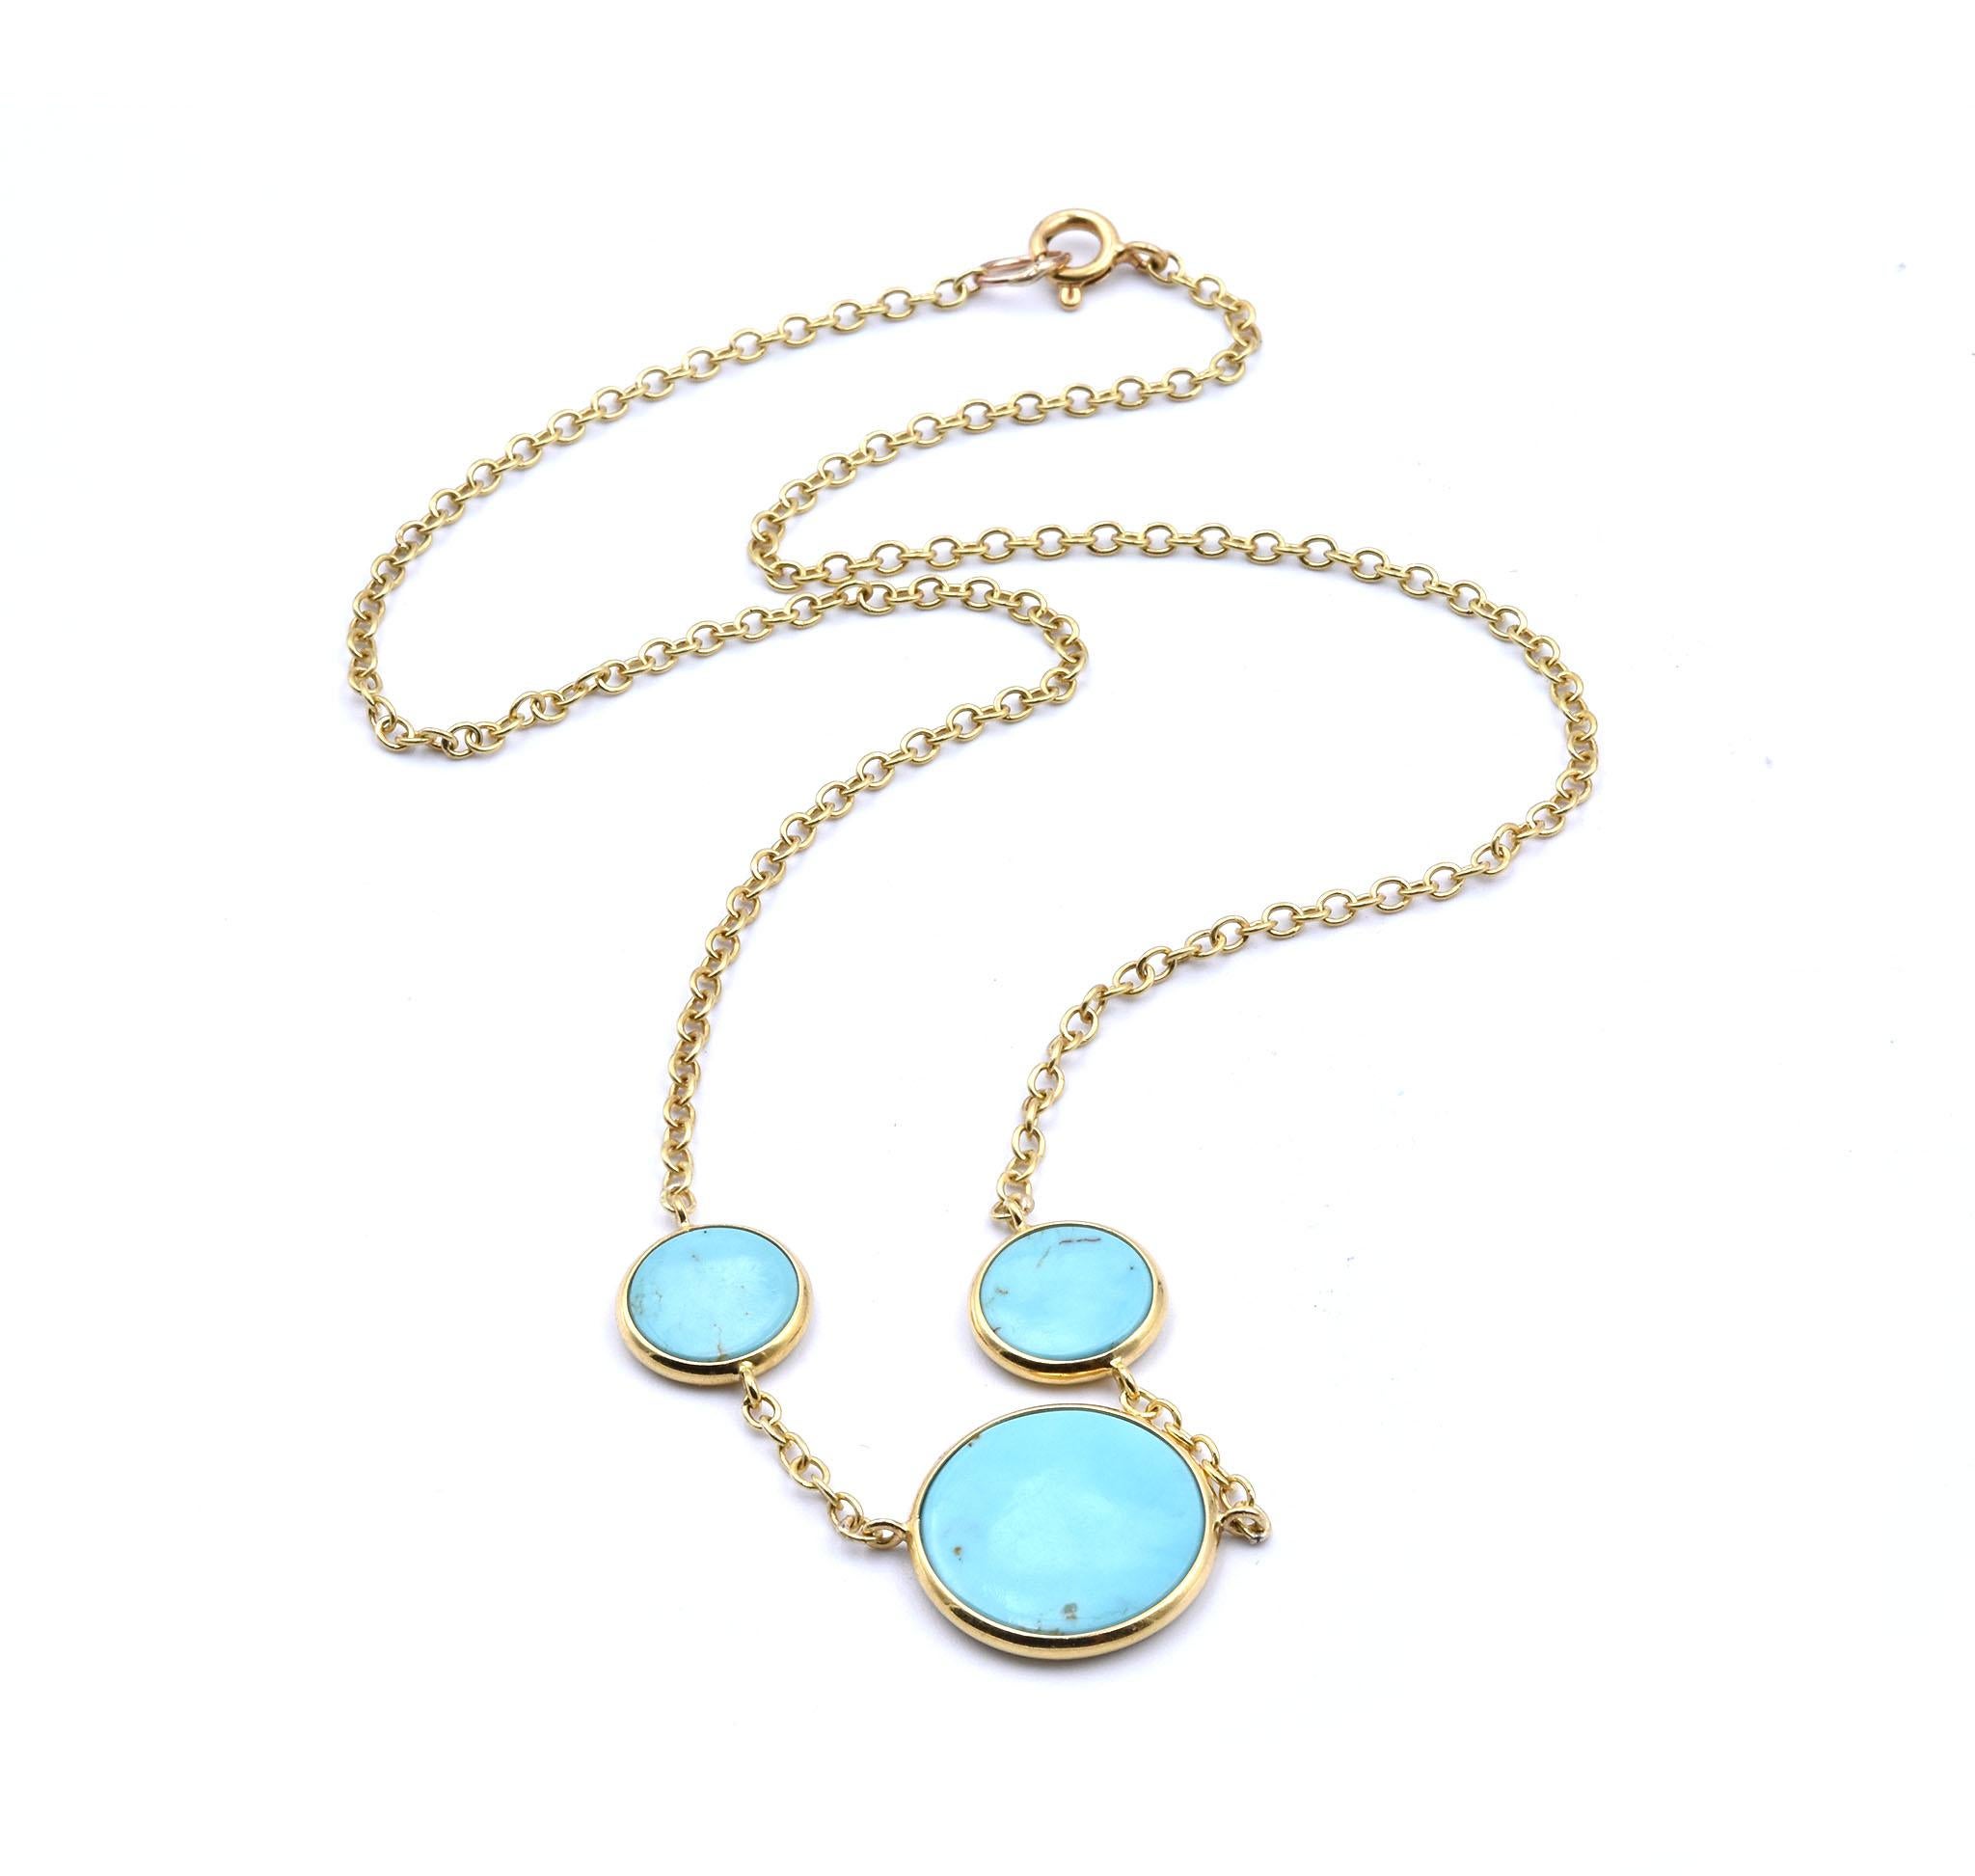 Material: 18k yellow gold
Gemstone: Persian turquoise
Dimensions: necklace is 16-inches in length, pendant measure 16.65mm x 27.25mm
Weight: 6.4 grams